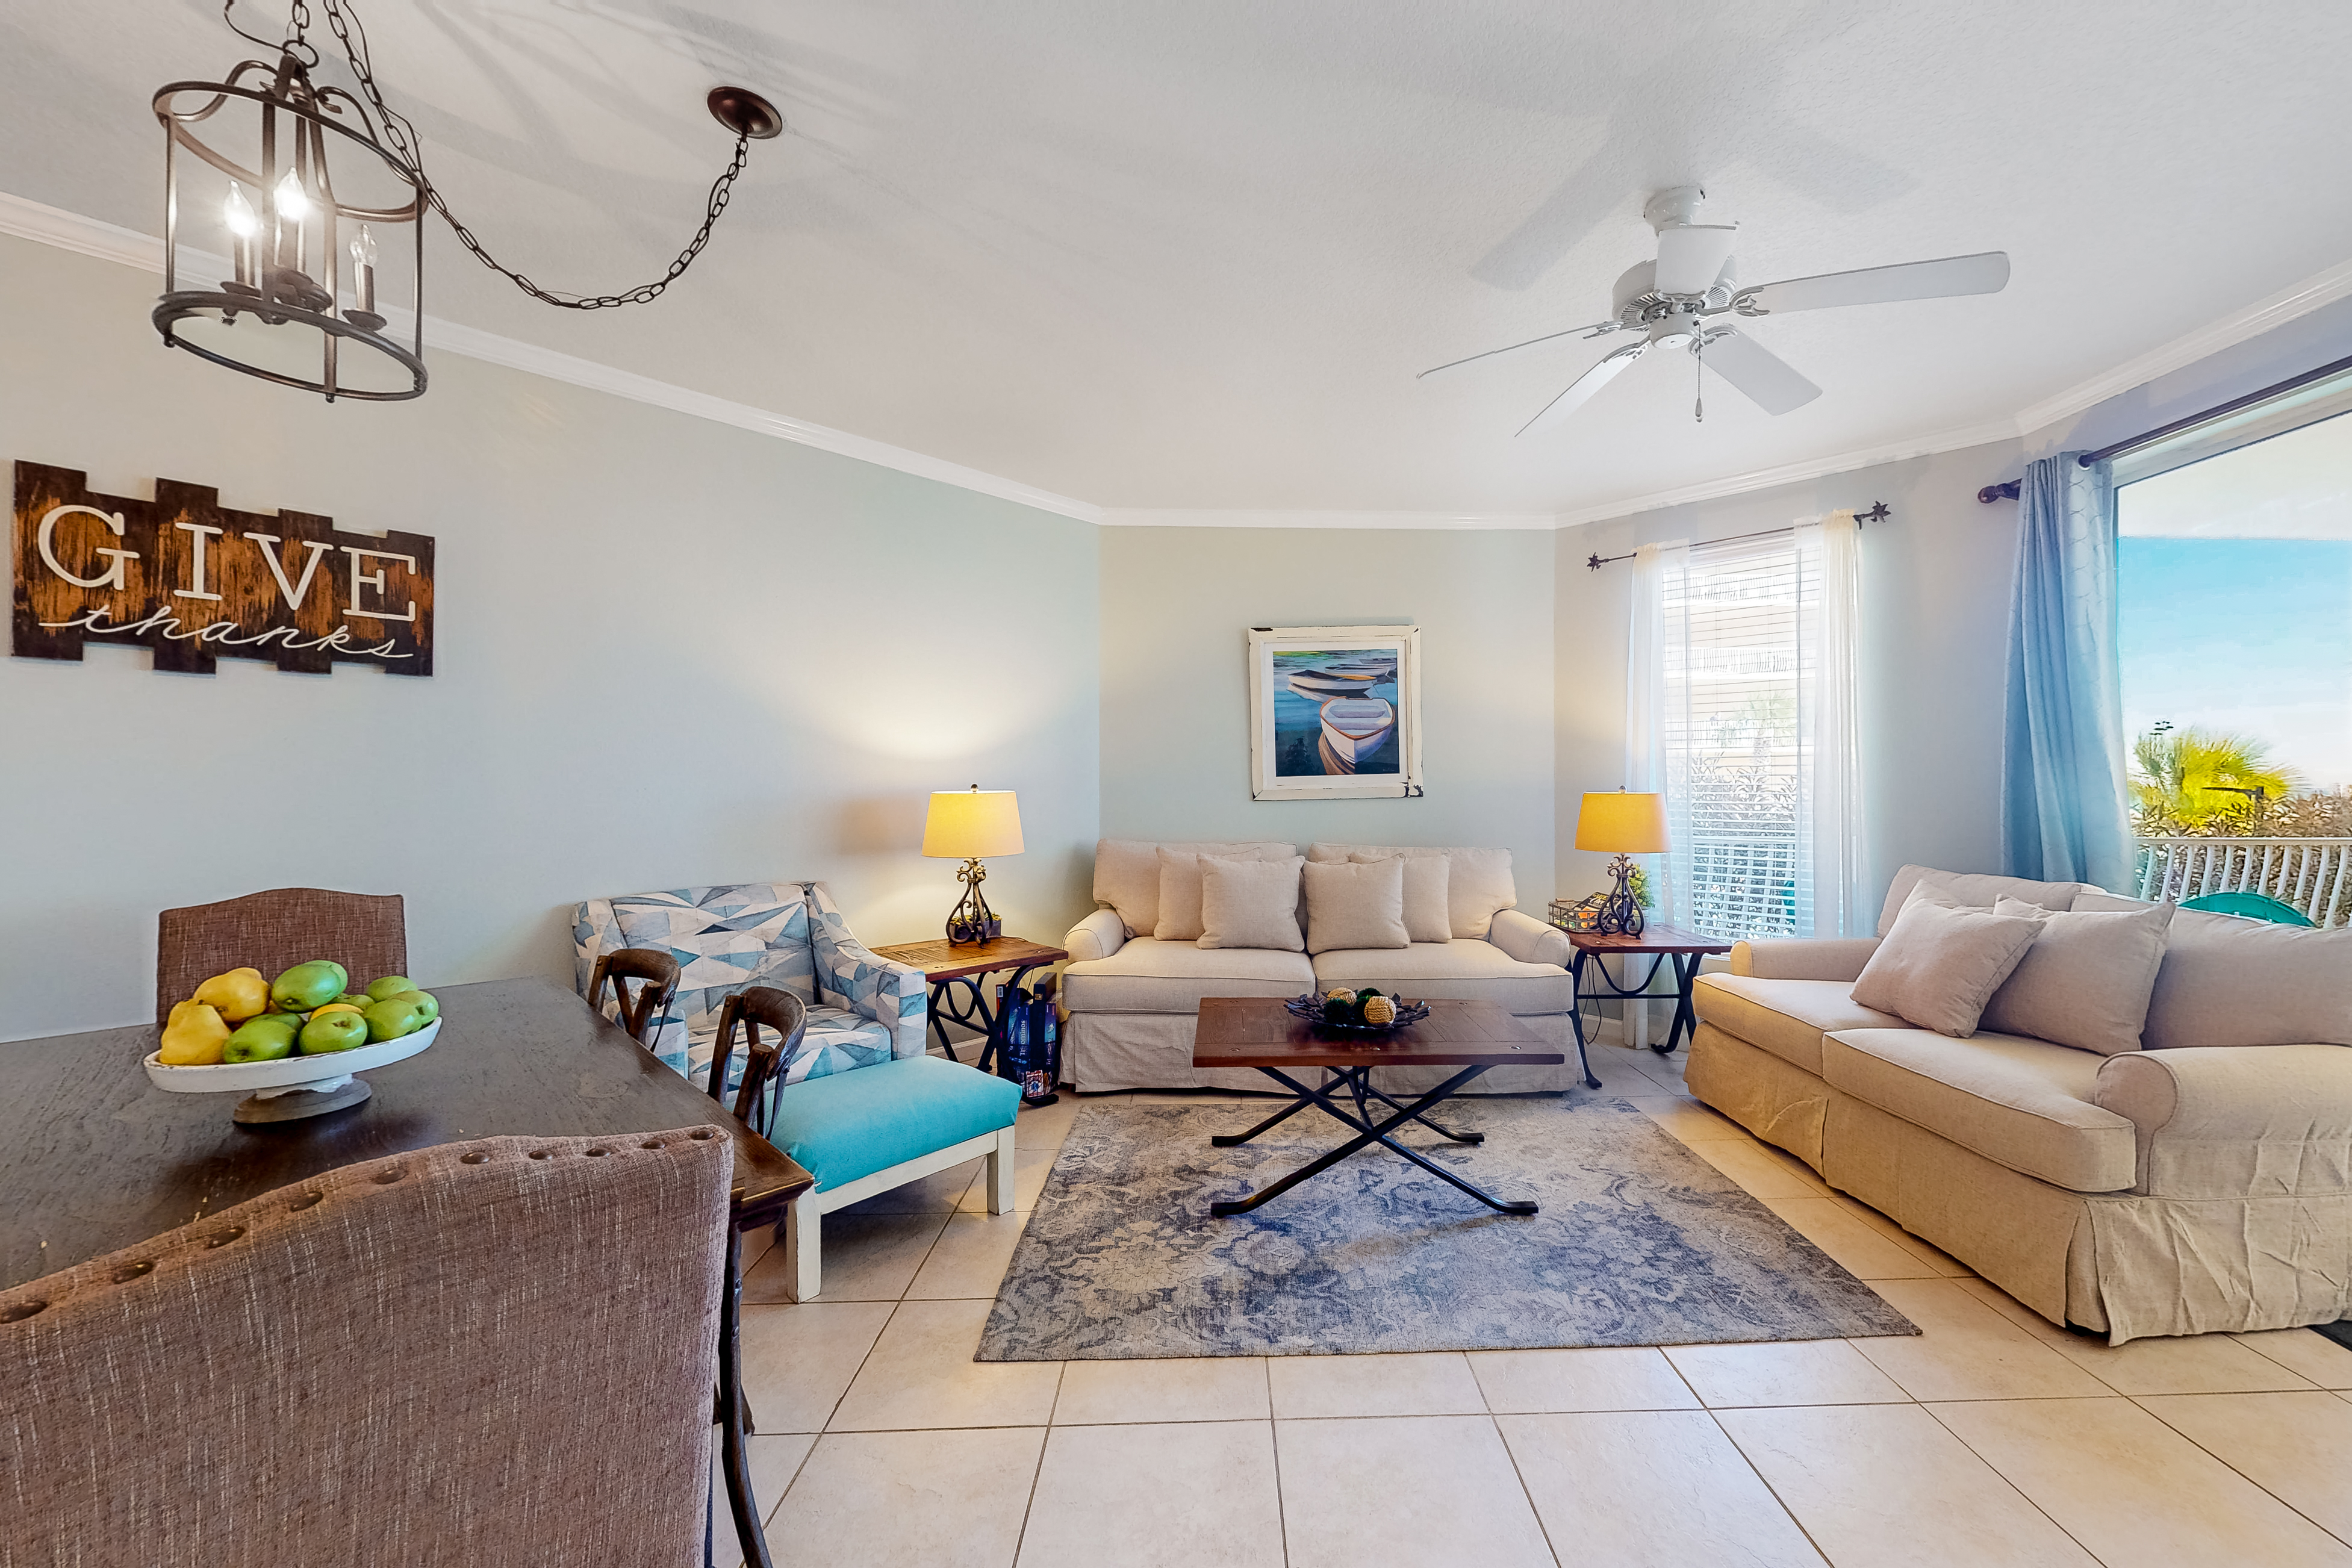 Dunes of Seagrove B103 Condo rental in Dunes of Seagrove in Highway 30-A Florida - #1